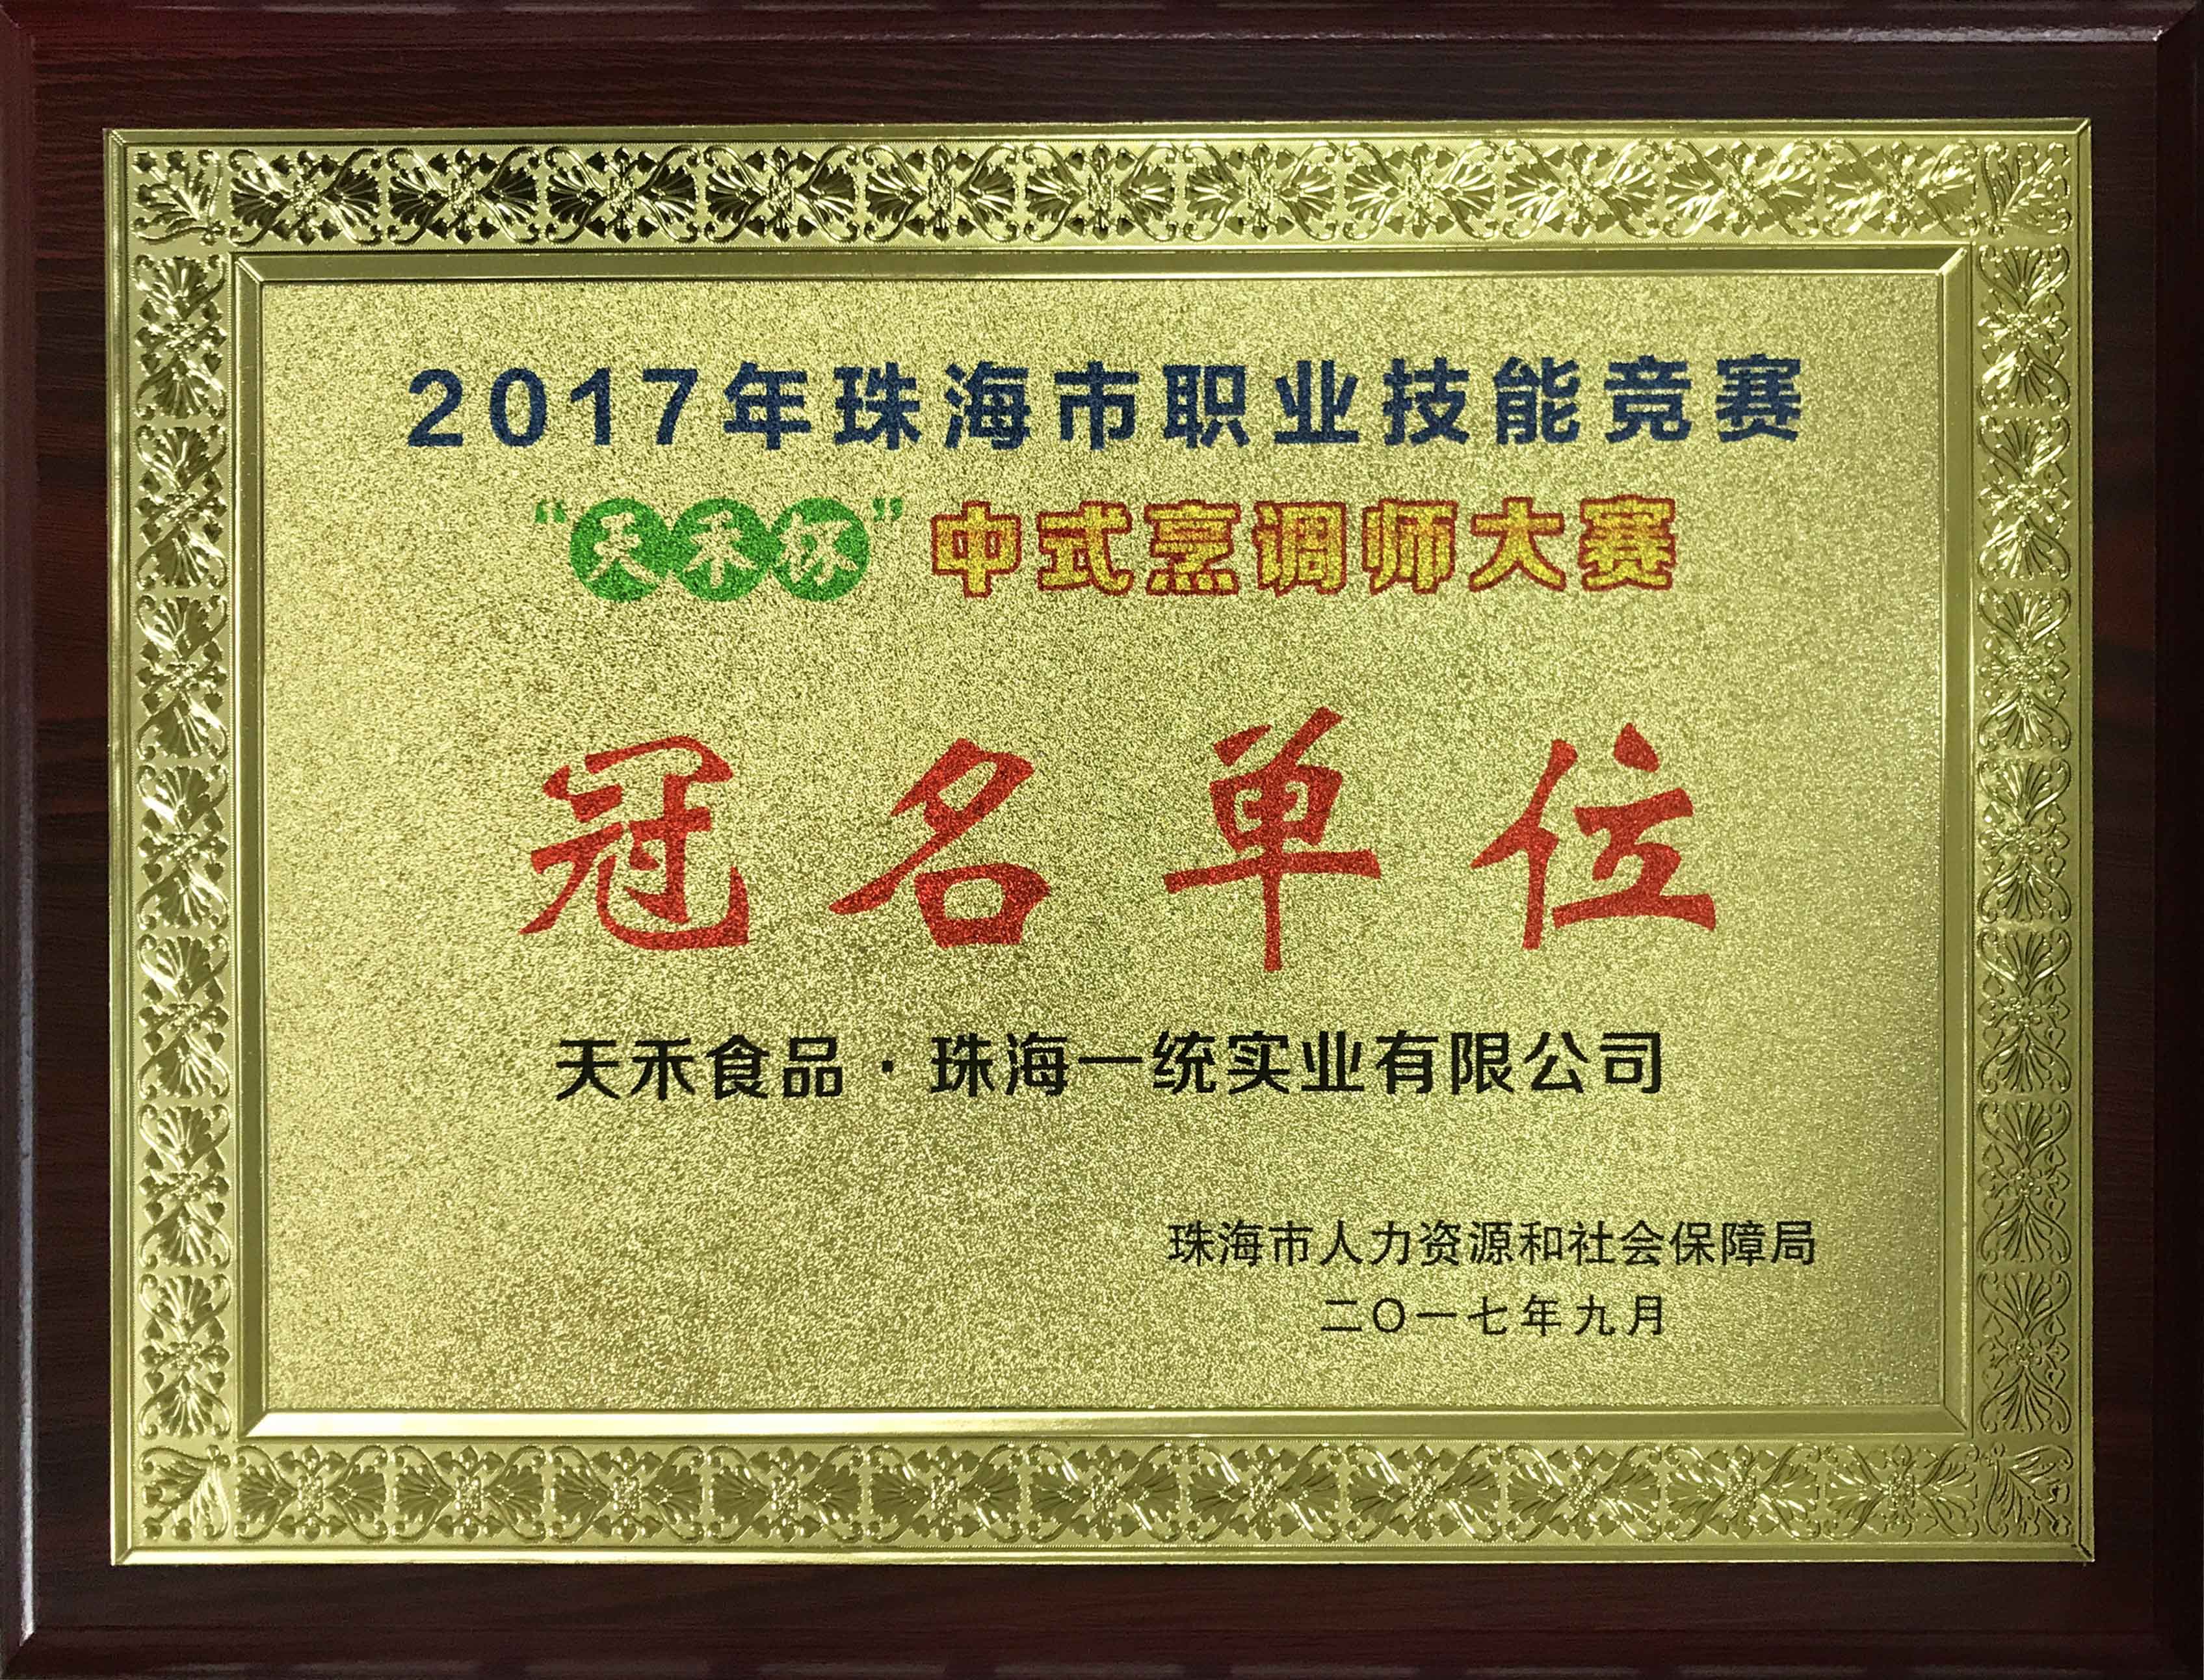 Tianhe cup Chinese cookery competition title unit